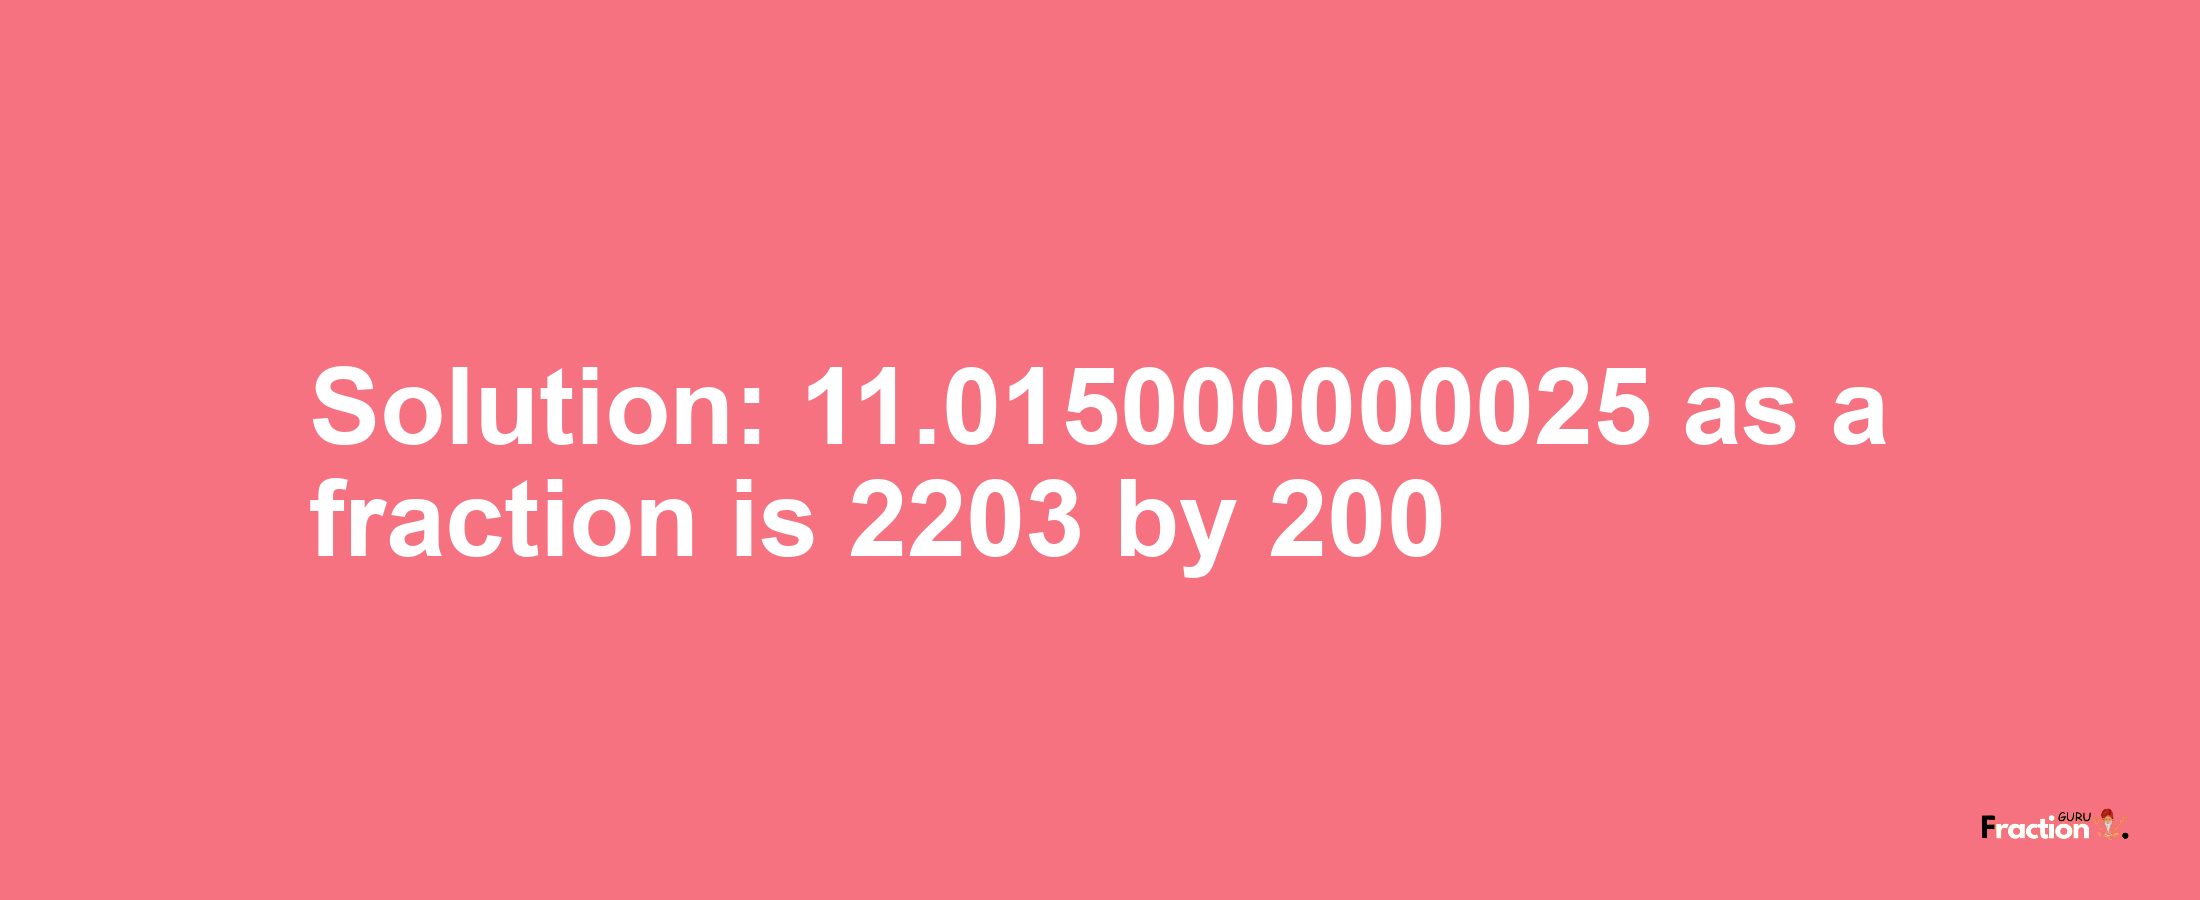 Solution:11.015000000025 as a fraction is 2203/200